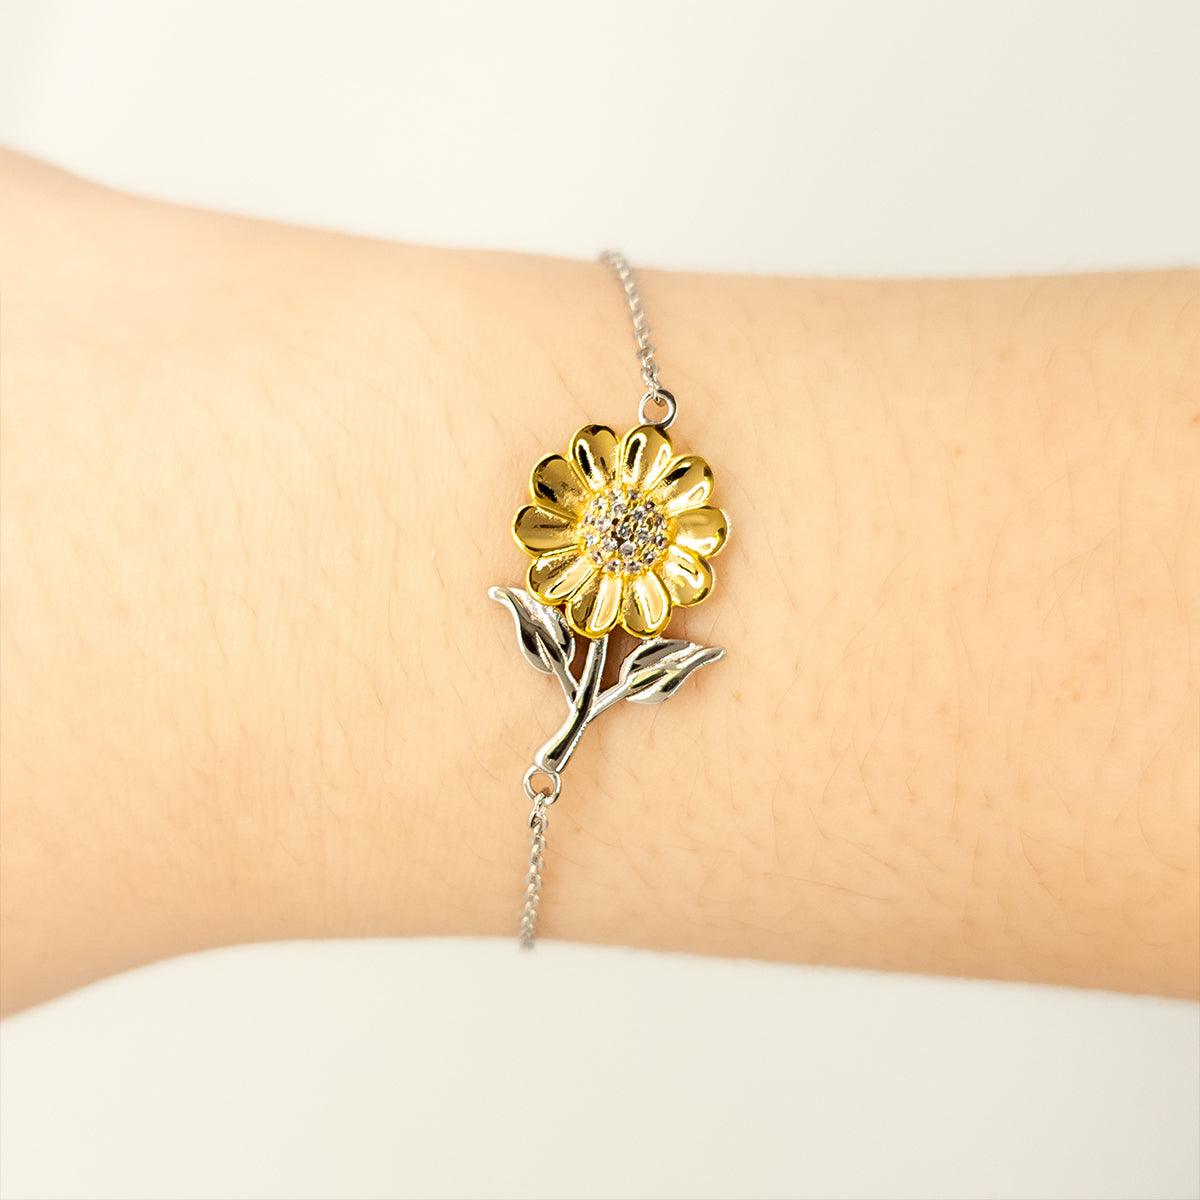 Sarcastic Mechanical Engineer Sunflower Bracelet Gifts, Christmas Holiday Gifts for Mechanical Engineer Birthday Message Card, Mechanical Engineer: Because greatness is woven into the fabric of every day, Coworkers, Friends - Mallard Moon Gift Shop